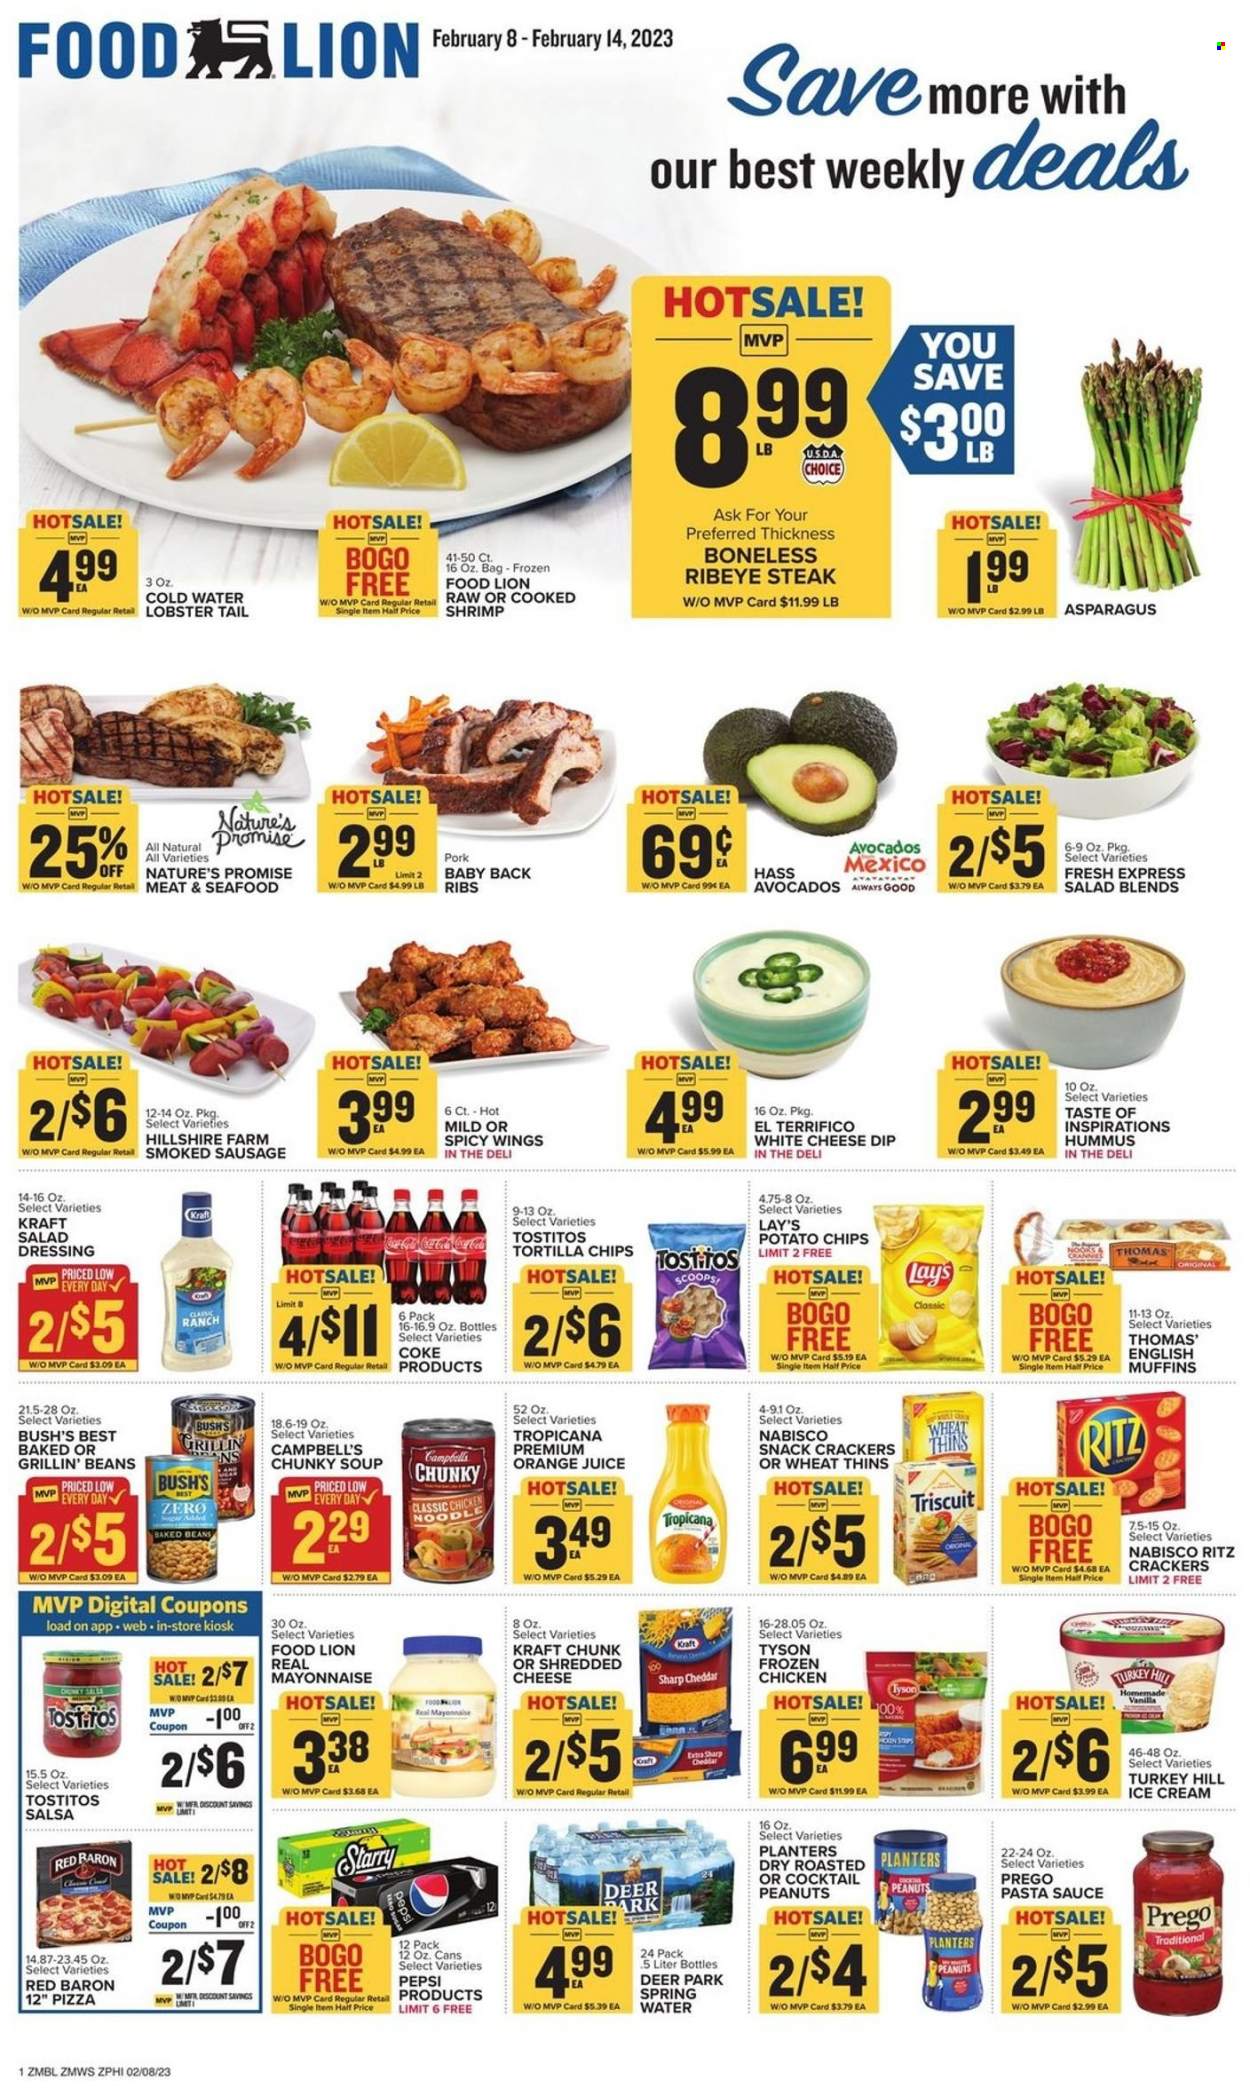 thumbnail - Food Lion Flyer - 02/08/2023 - 02/14/2023 - Sales products - english muffins, Nature’s Promise, asparagus, beans, avocado, lobster, seafood, lobster tail, shrimps, Campbell's, pizza, pasta sauce, soup, sauce, noodles, Kraft®, Hillshire Farm, sausage, smoked sausage, hummus, shredded cheese, mayonnaise, dip, ice cream, Red Baron, snack, crackers, RITZ, tortilla chips, potato chips, Lay’s, Thins, Tostitos, baked beans, salad dressing, dressing, salsa, peanuts, Planters, Coca-Cola, Pepsi, orange juice, juice, beef meat, beef steak, steak, ribeye steak, ribs, pork meat, pork ribs, pork back ribs. Page 1.